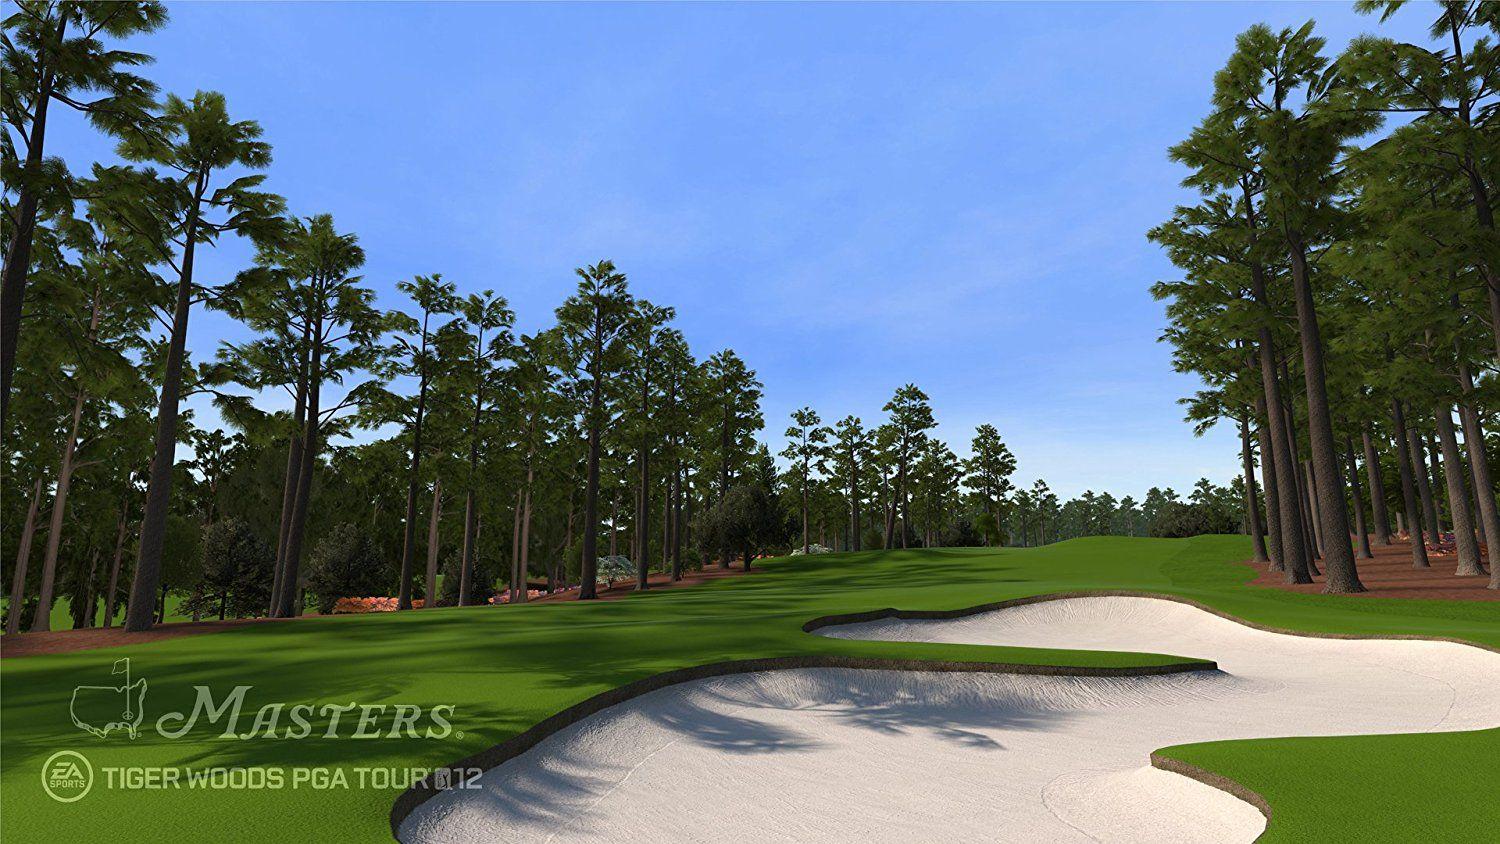 Tiger Woods PGA TOUR 12: The Masters 360: Video